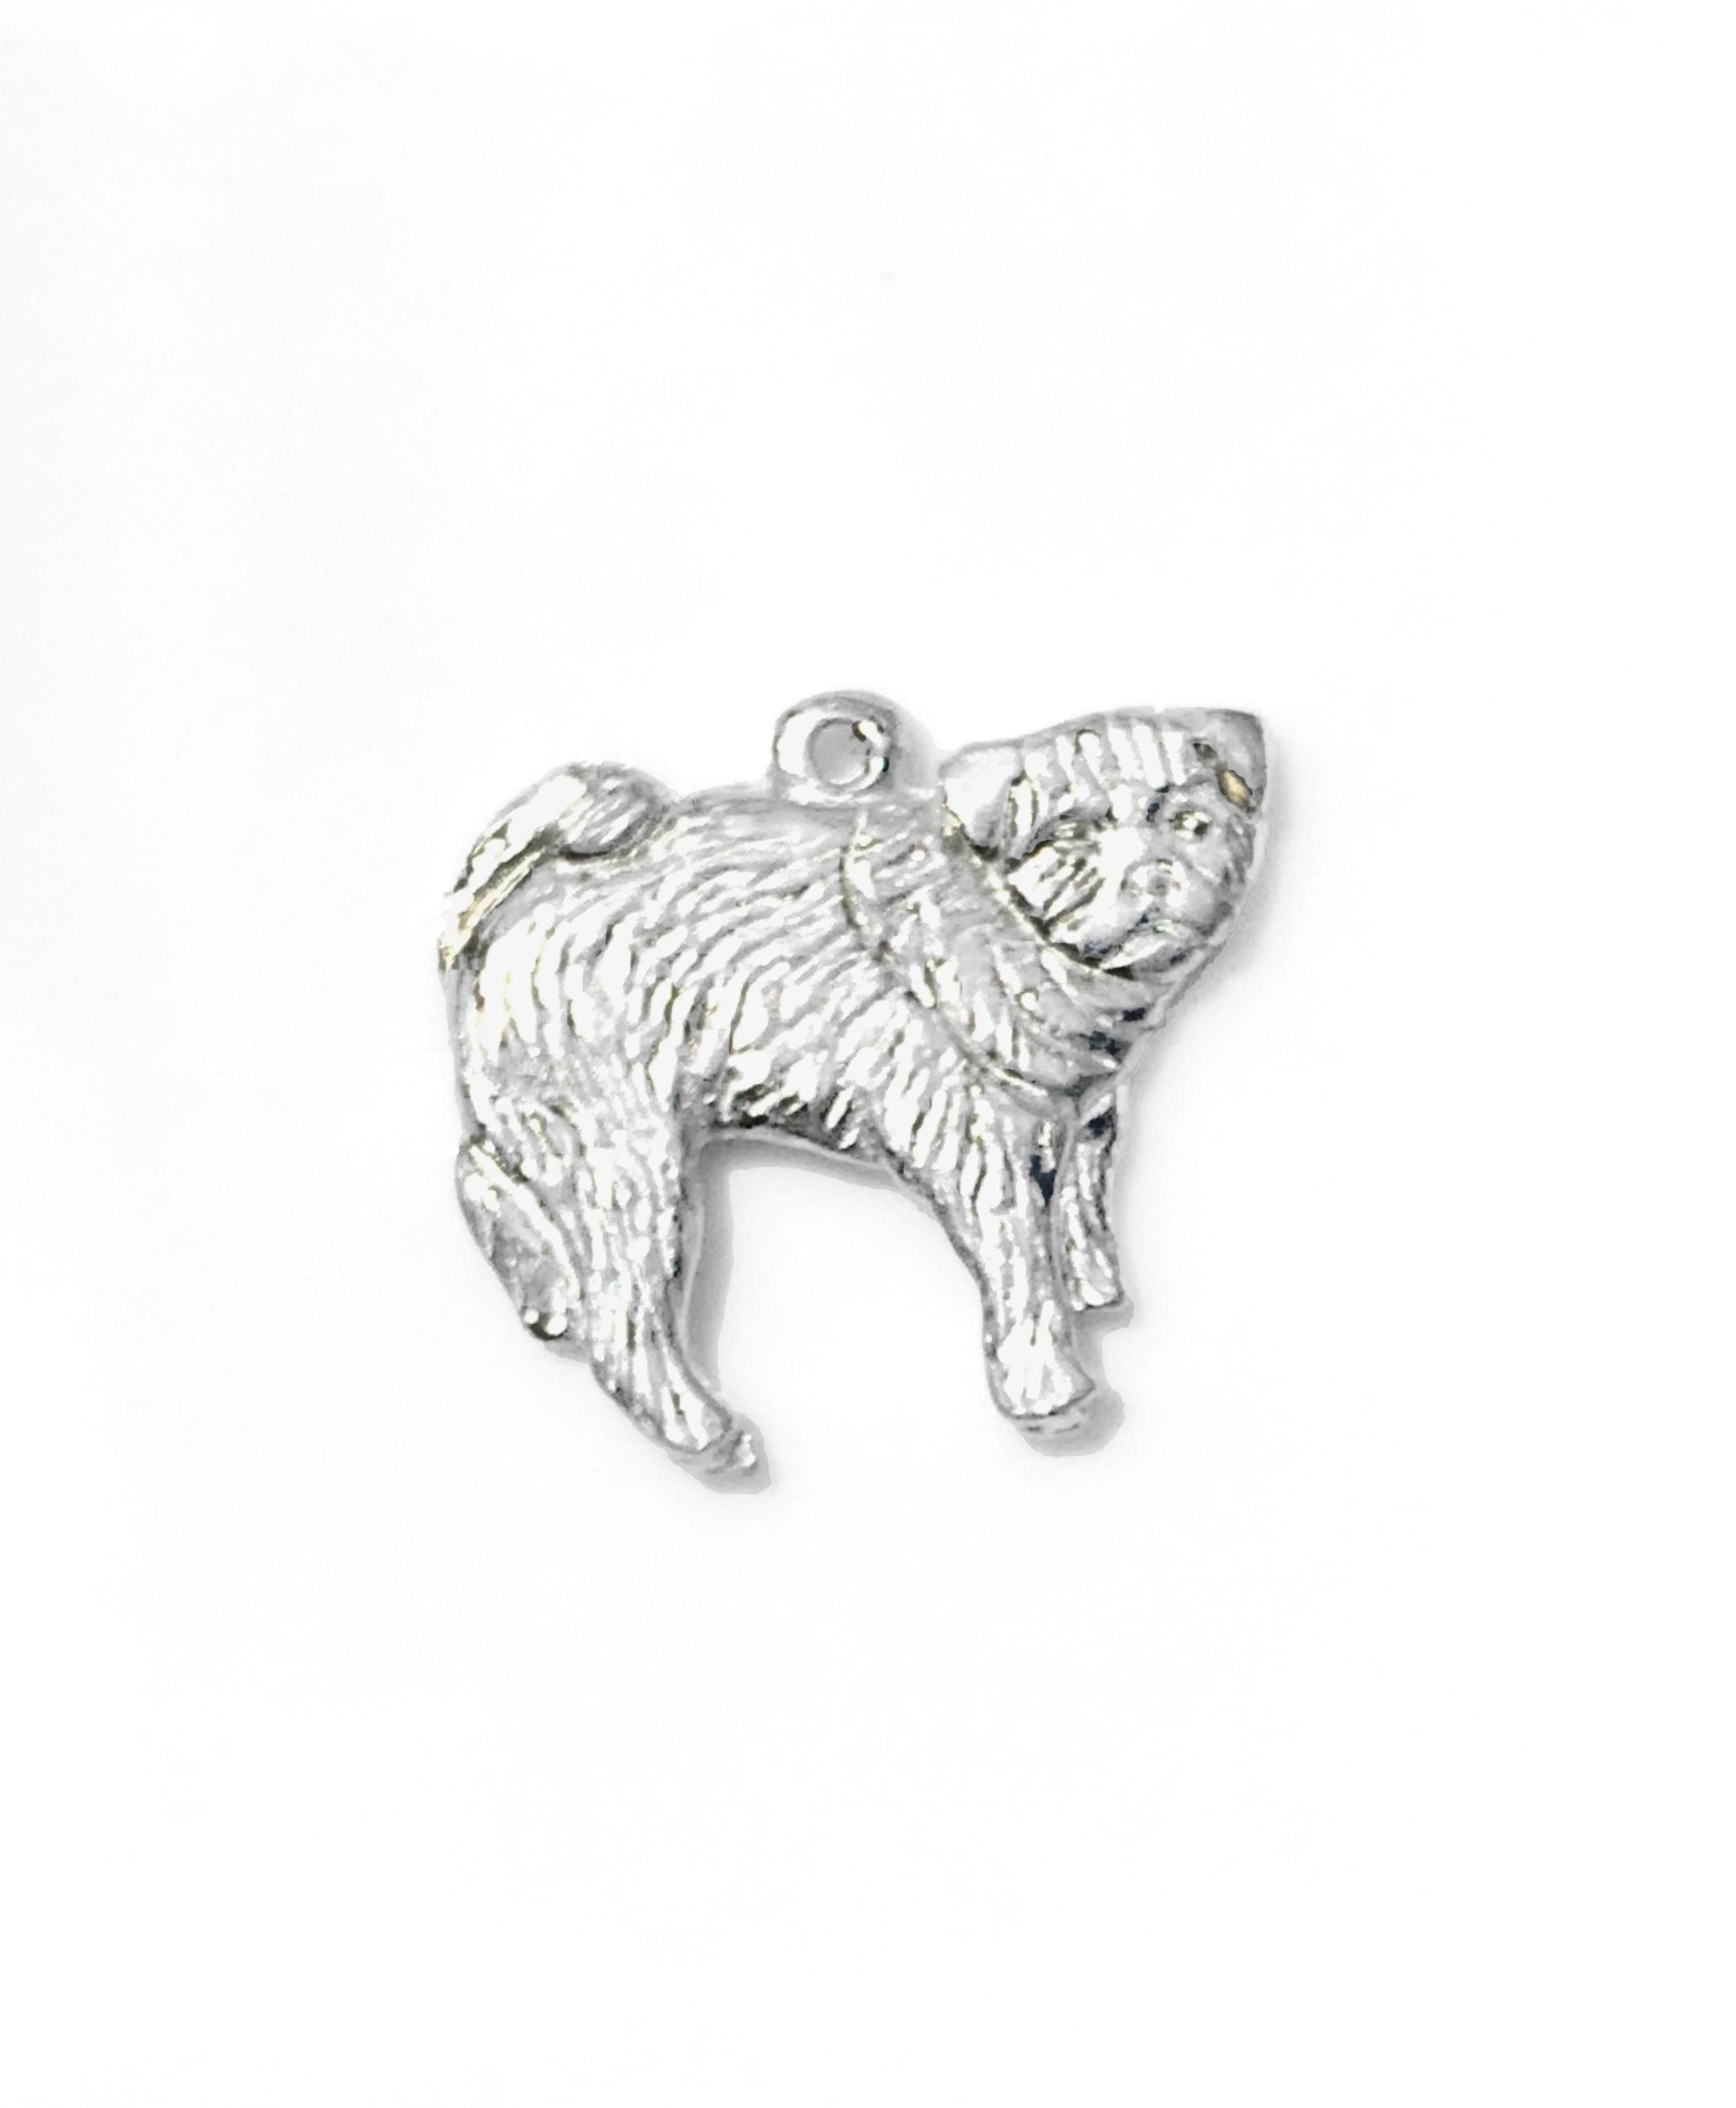 Handmade Pewter Dog Breed Charm Pendant Necklace Jewelry Womens Accessory - House of Morgan Pewter